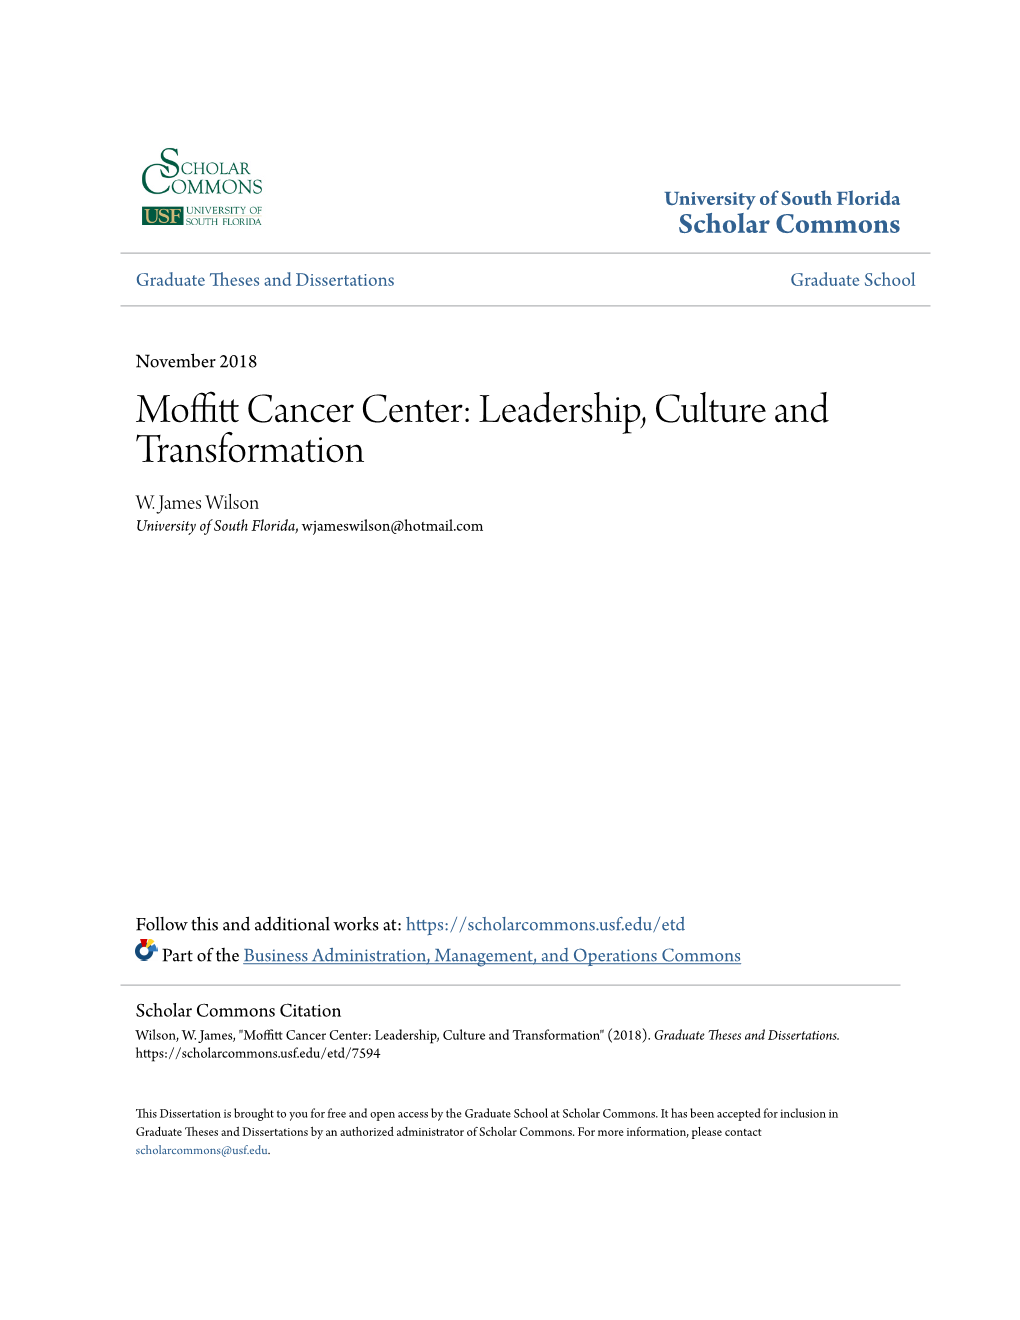 Moffitt Cancer Center: Leadership, Culture and Transformation